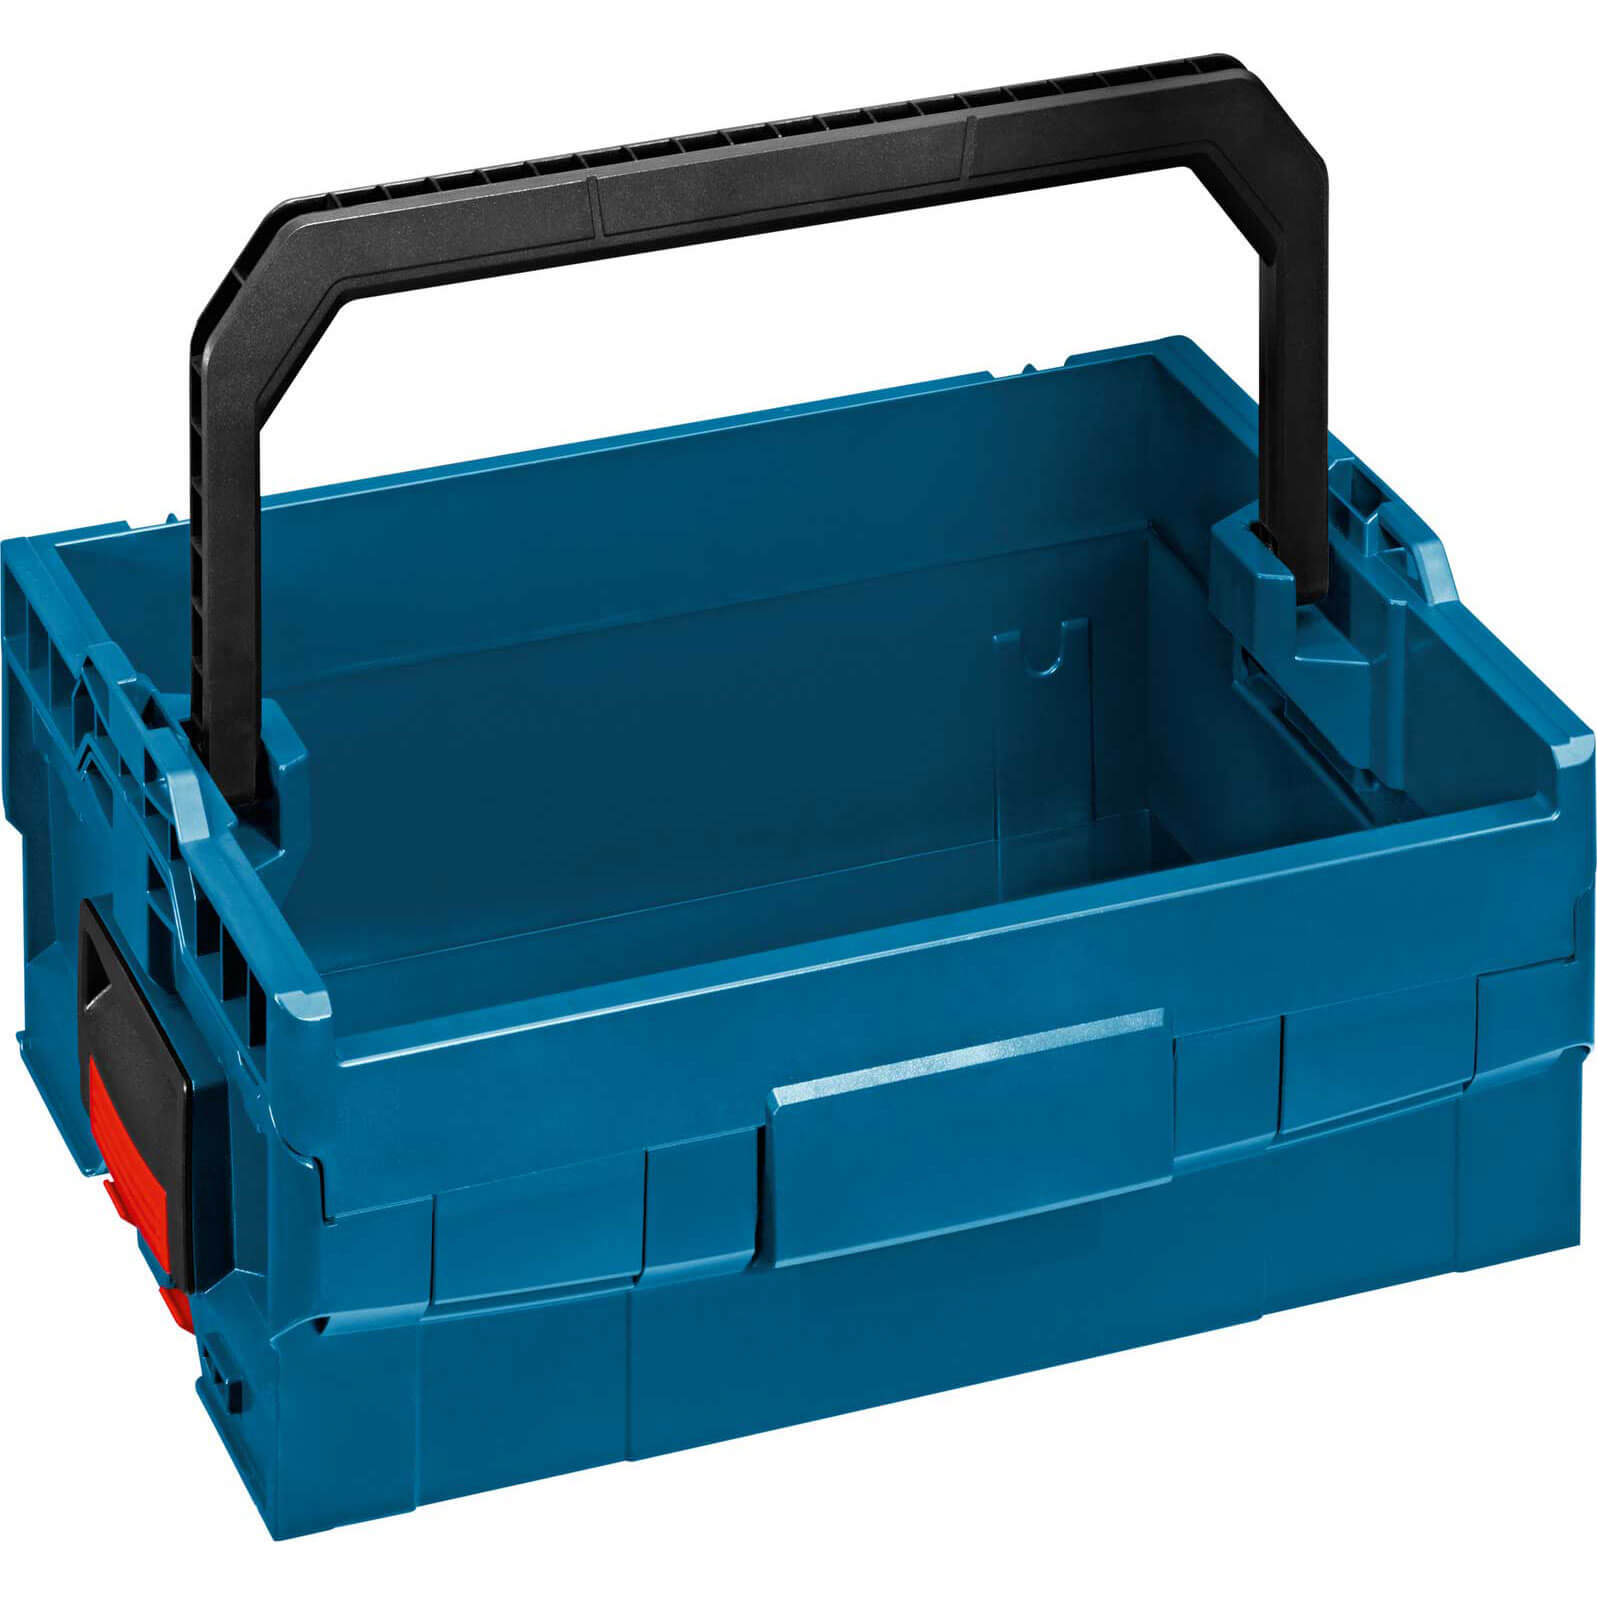 Image of Bosch LT-BOXX Power Tool Tote 170mm